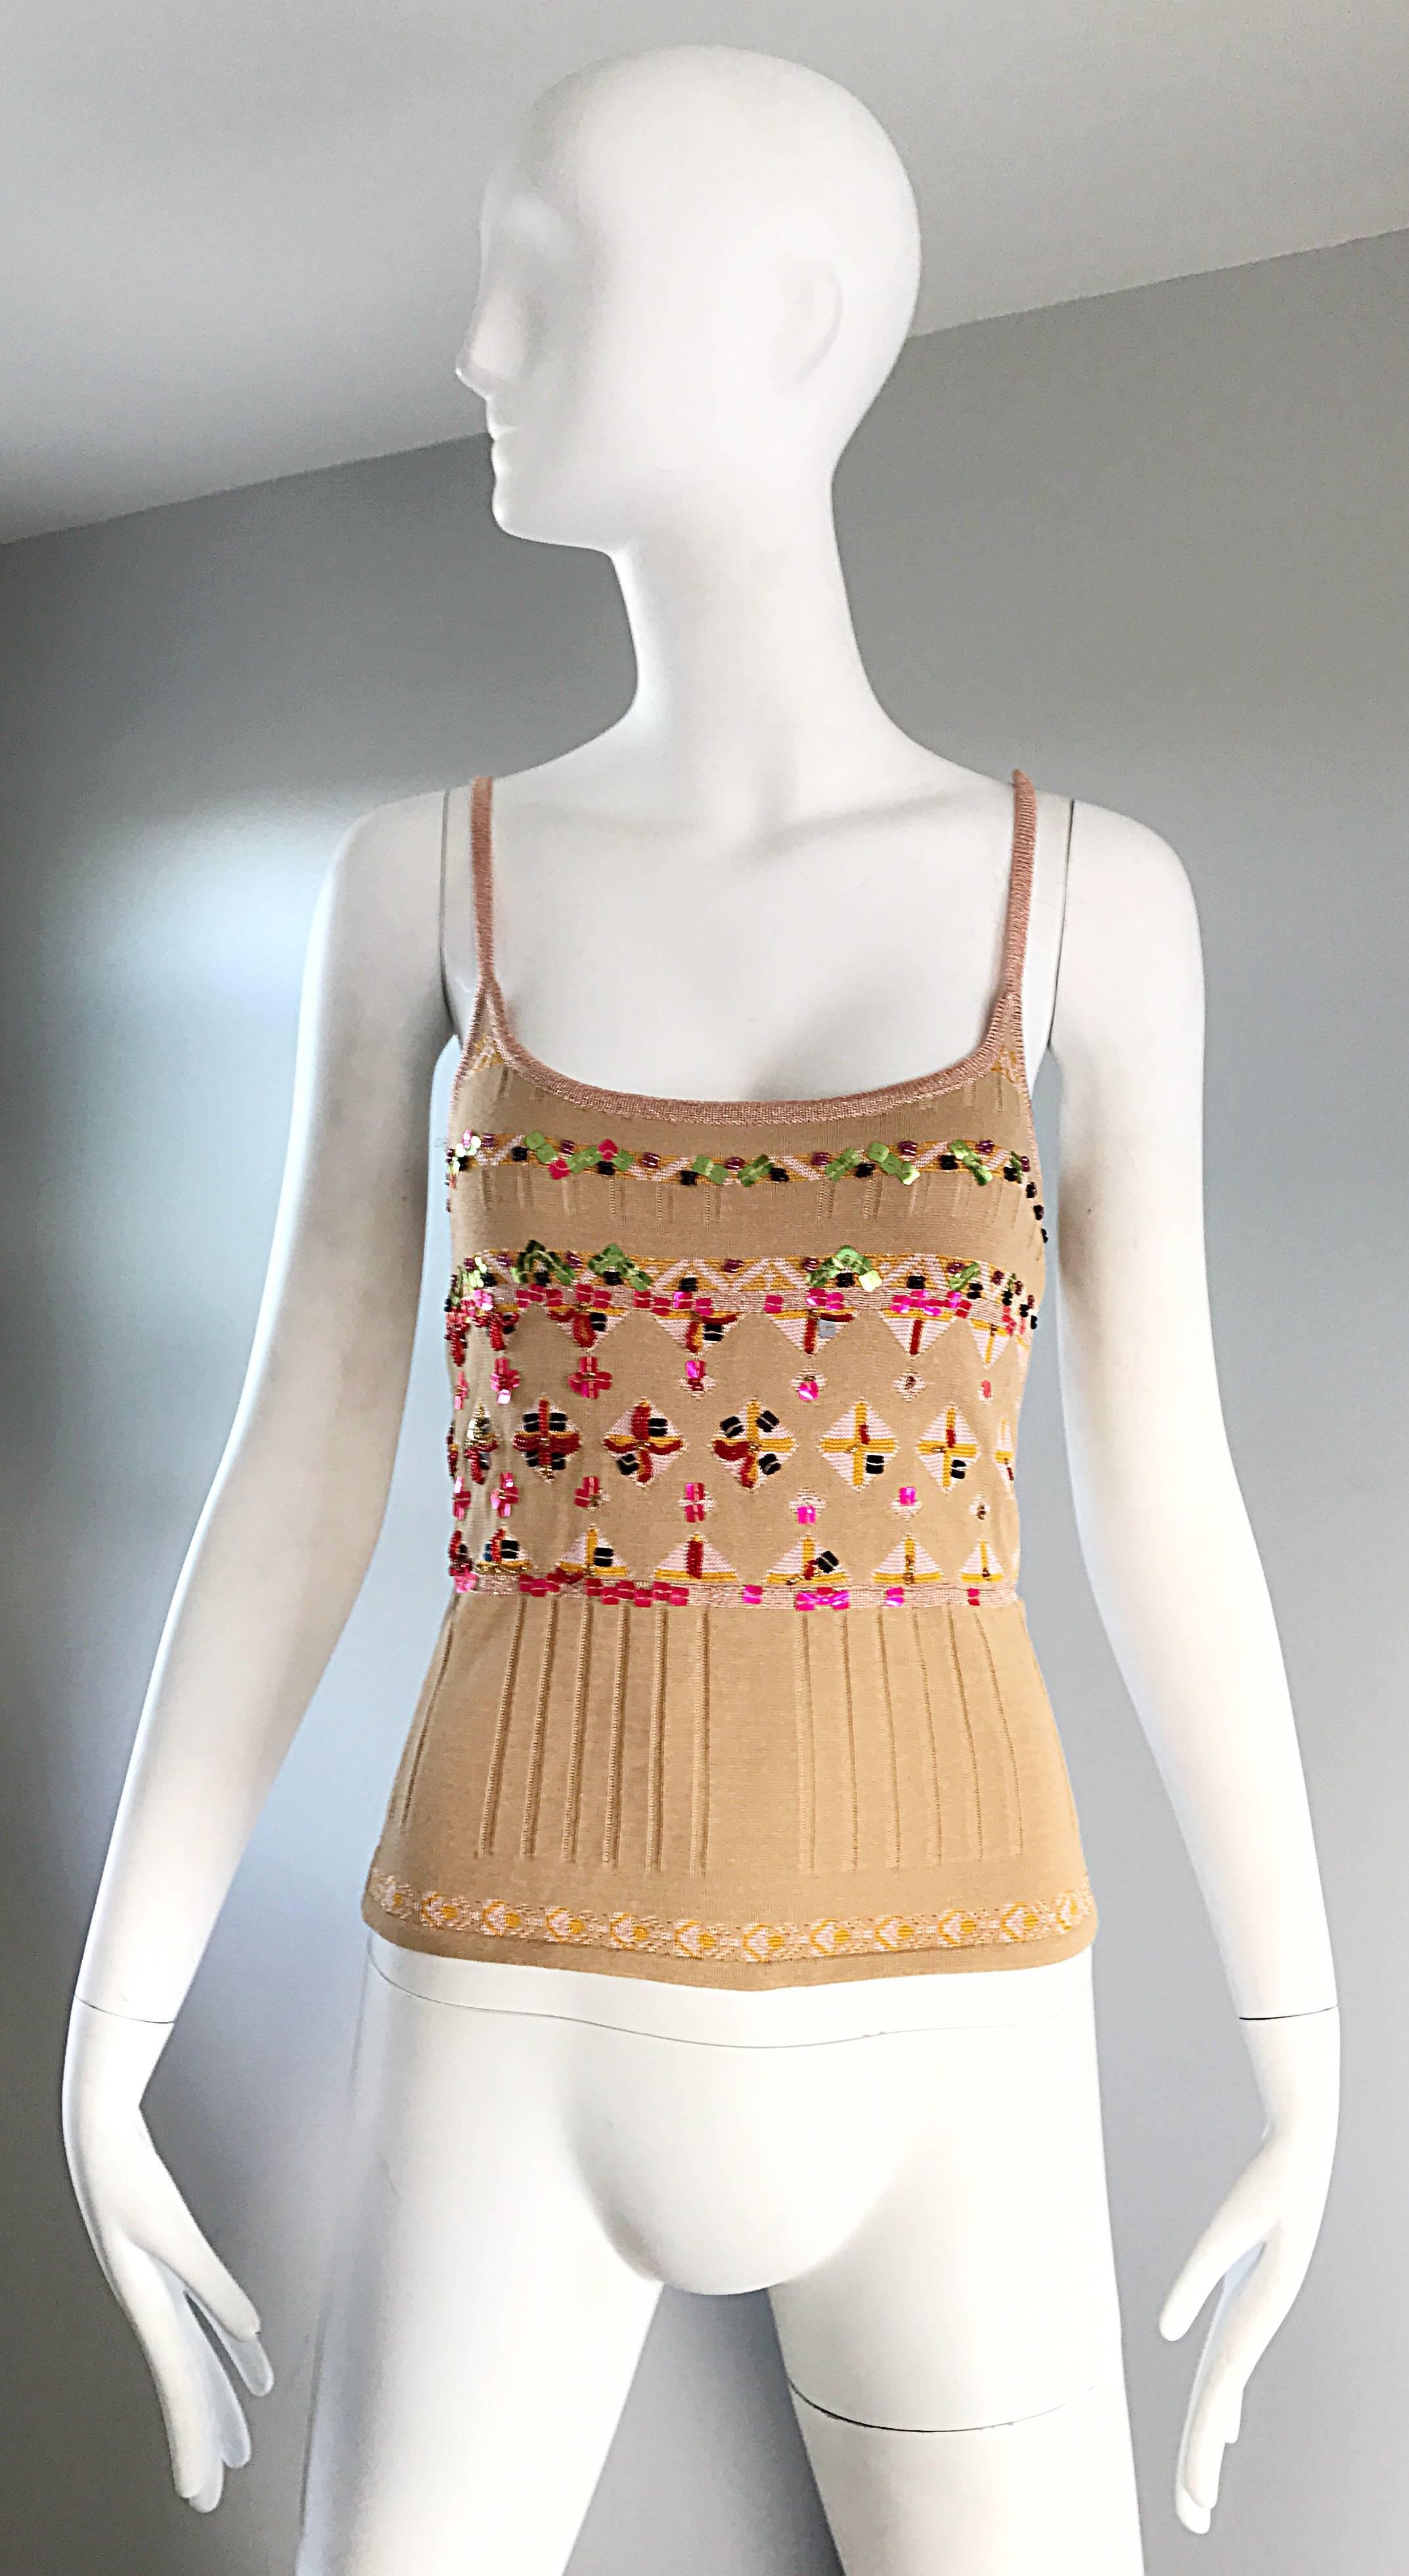 Beautiful vintage 90s CHRISTIAN LACROIX gold knit sweater top! Colorful embroidery throughout, with hand-sewn sequins mixed in. Rose gold metallic straps and along the bust. Couture quality, with heavy attention to detail. Rayon blend. Can easily be